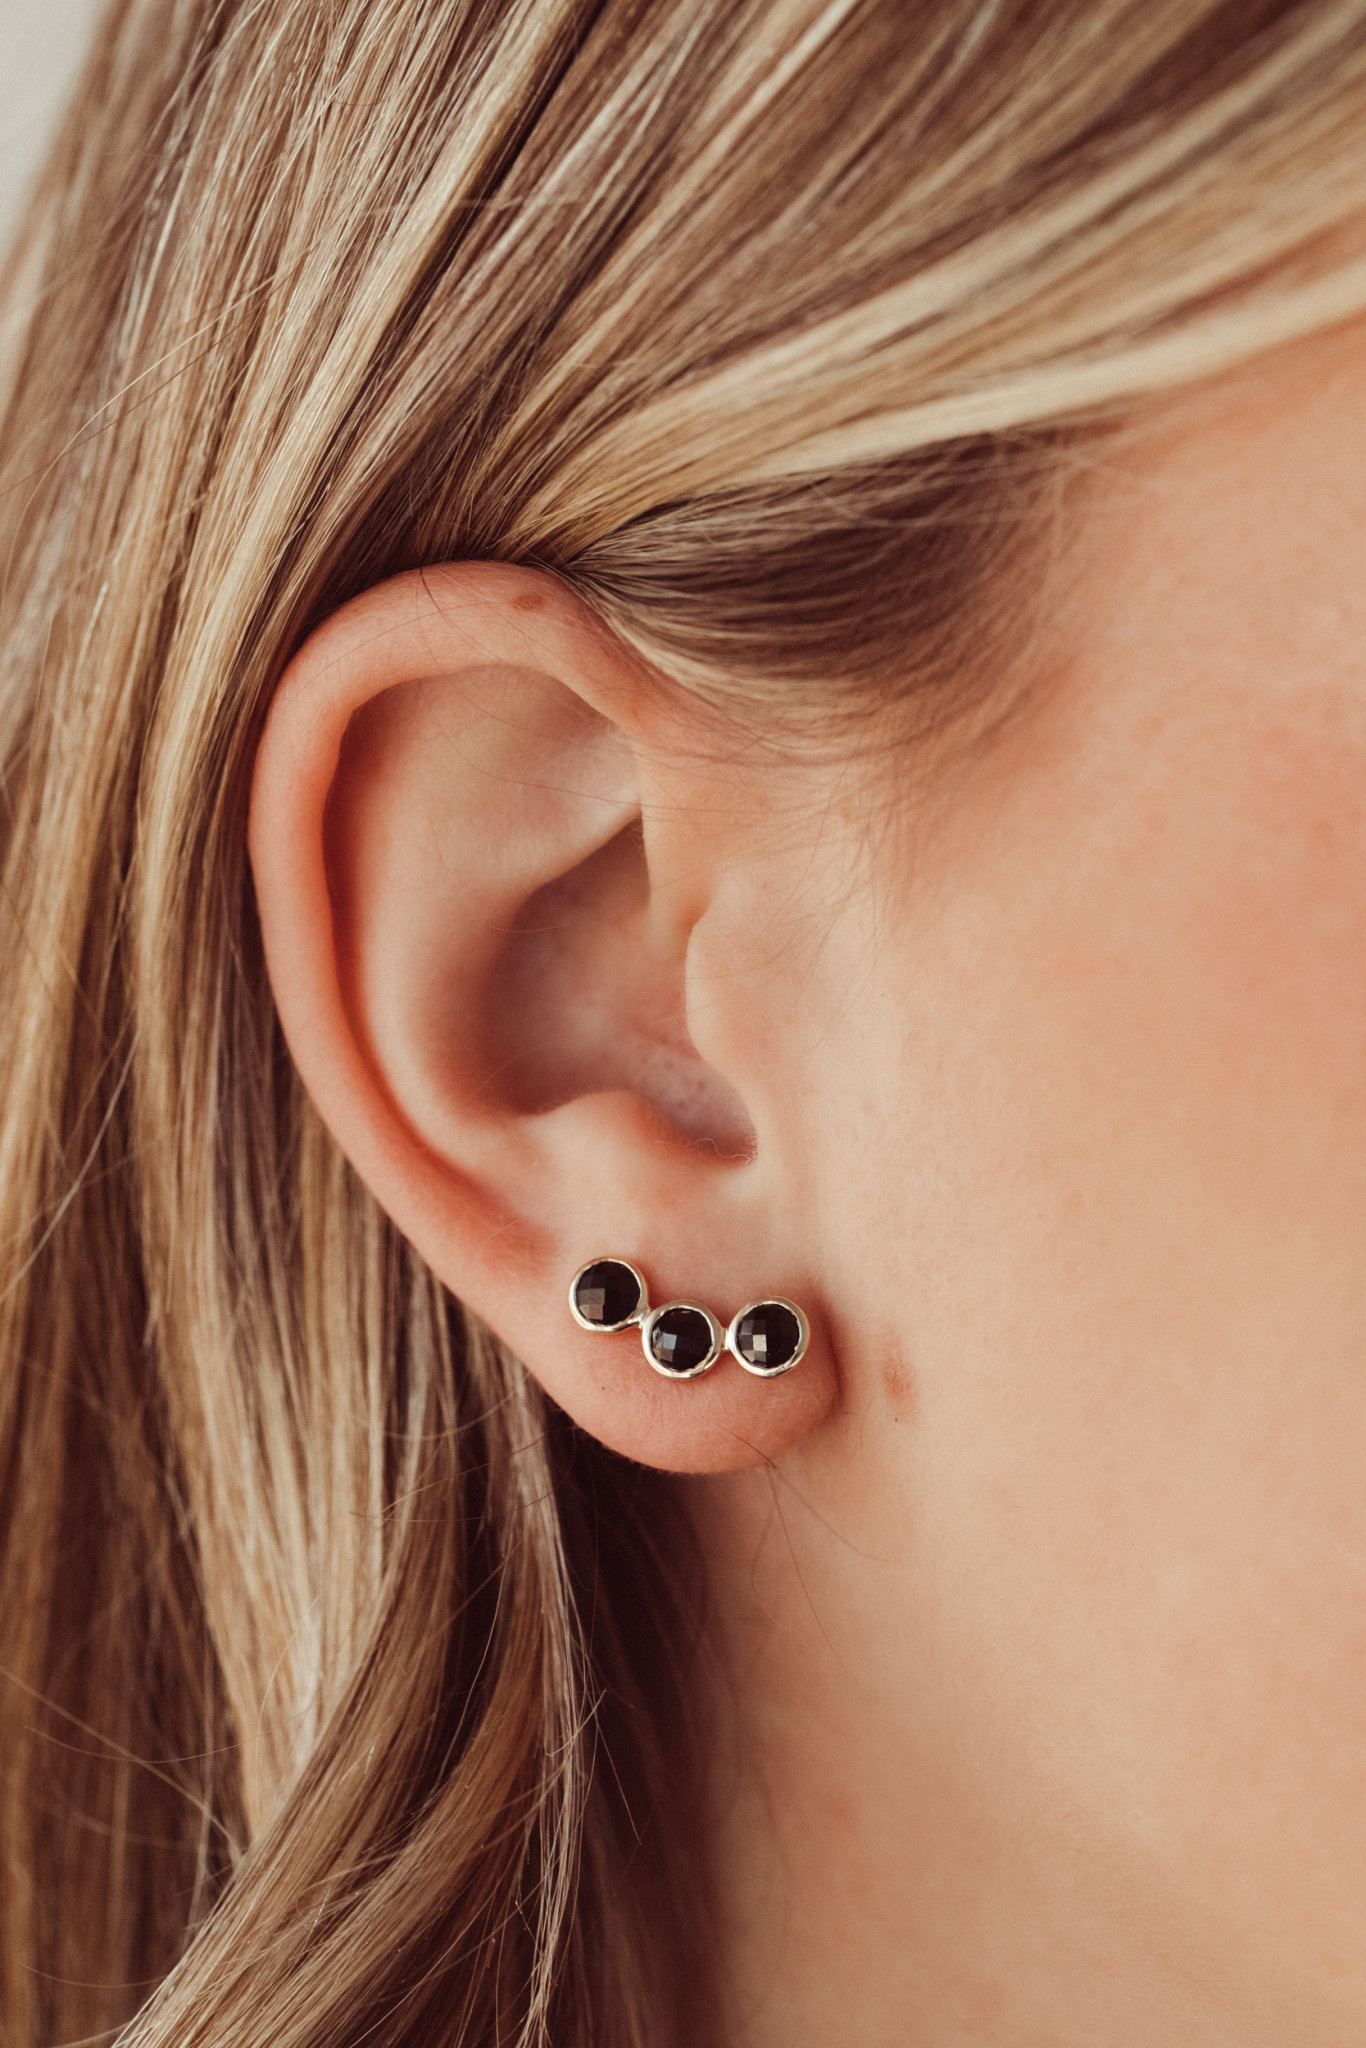  Immobird Black Stud Earrings for with Black Spinel